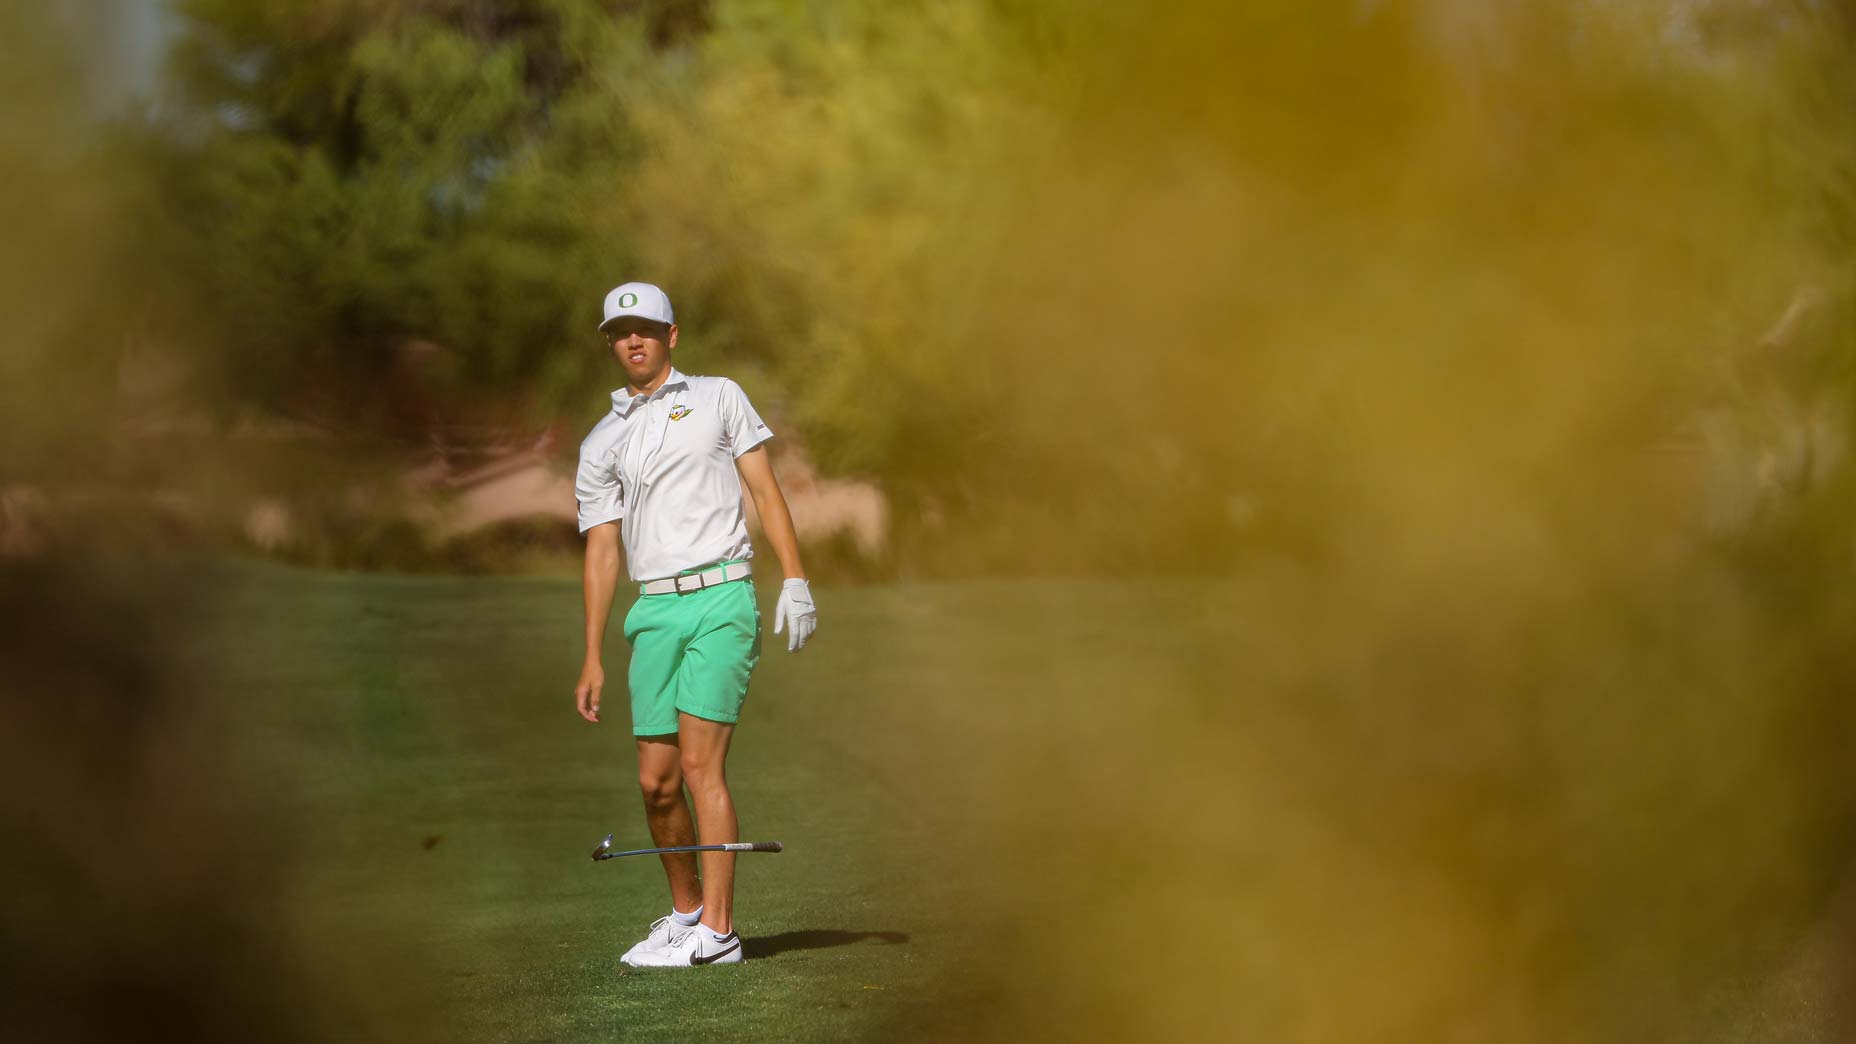 Gregory Solhaug of the Oregon Ducks drops his club in frustration after hitting his approach shot during the Division I Men's Golf Championship held at Grayhawk Golf Club on May 27, 2023 in Scottsdale, Arizona.